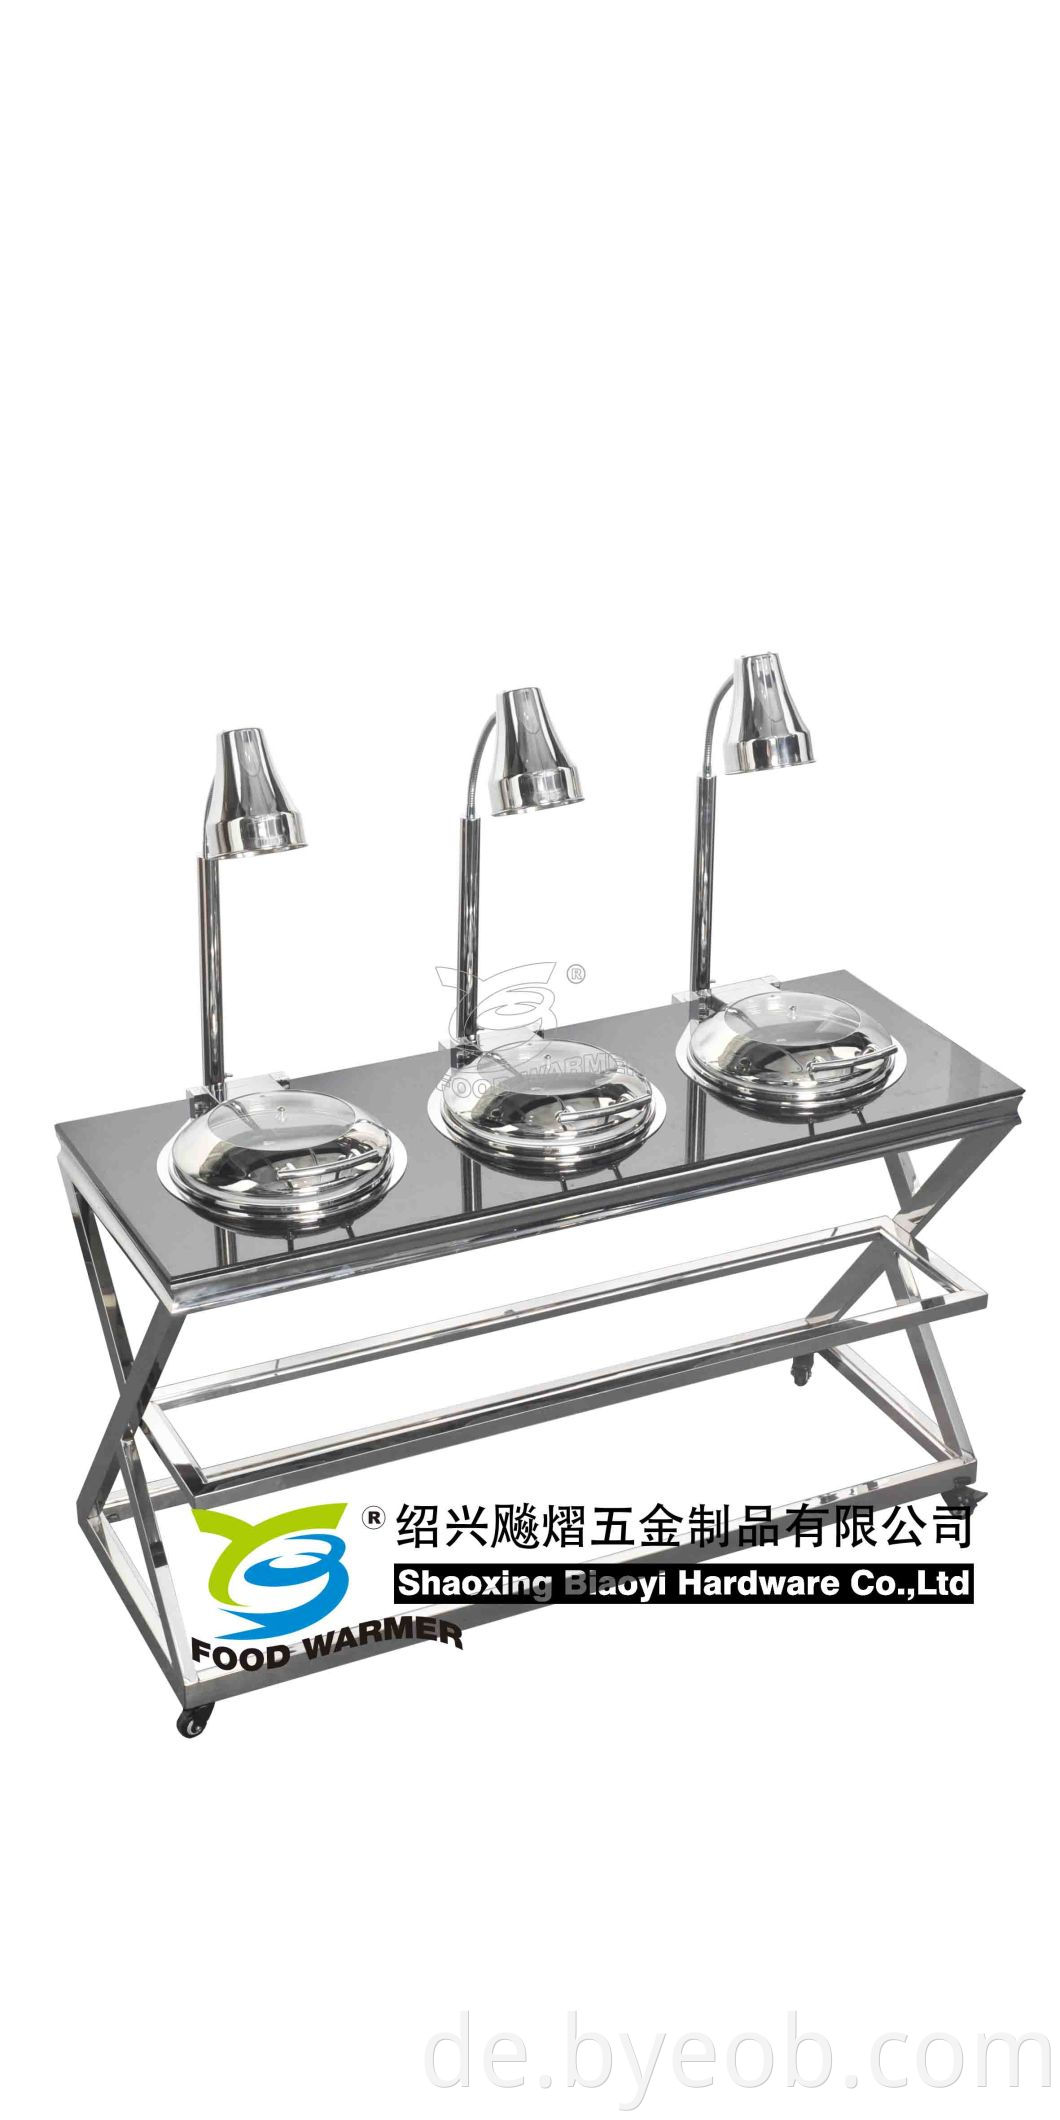 Mobile Table Chafing Dish mit Heizung